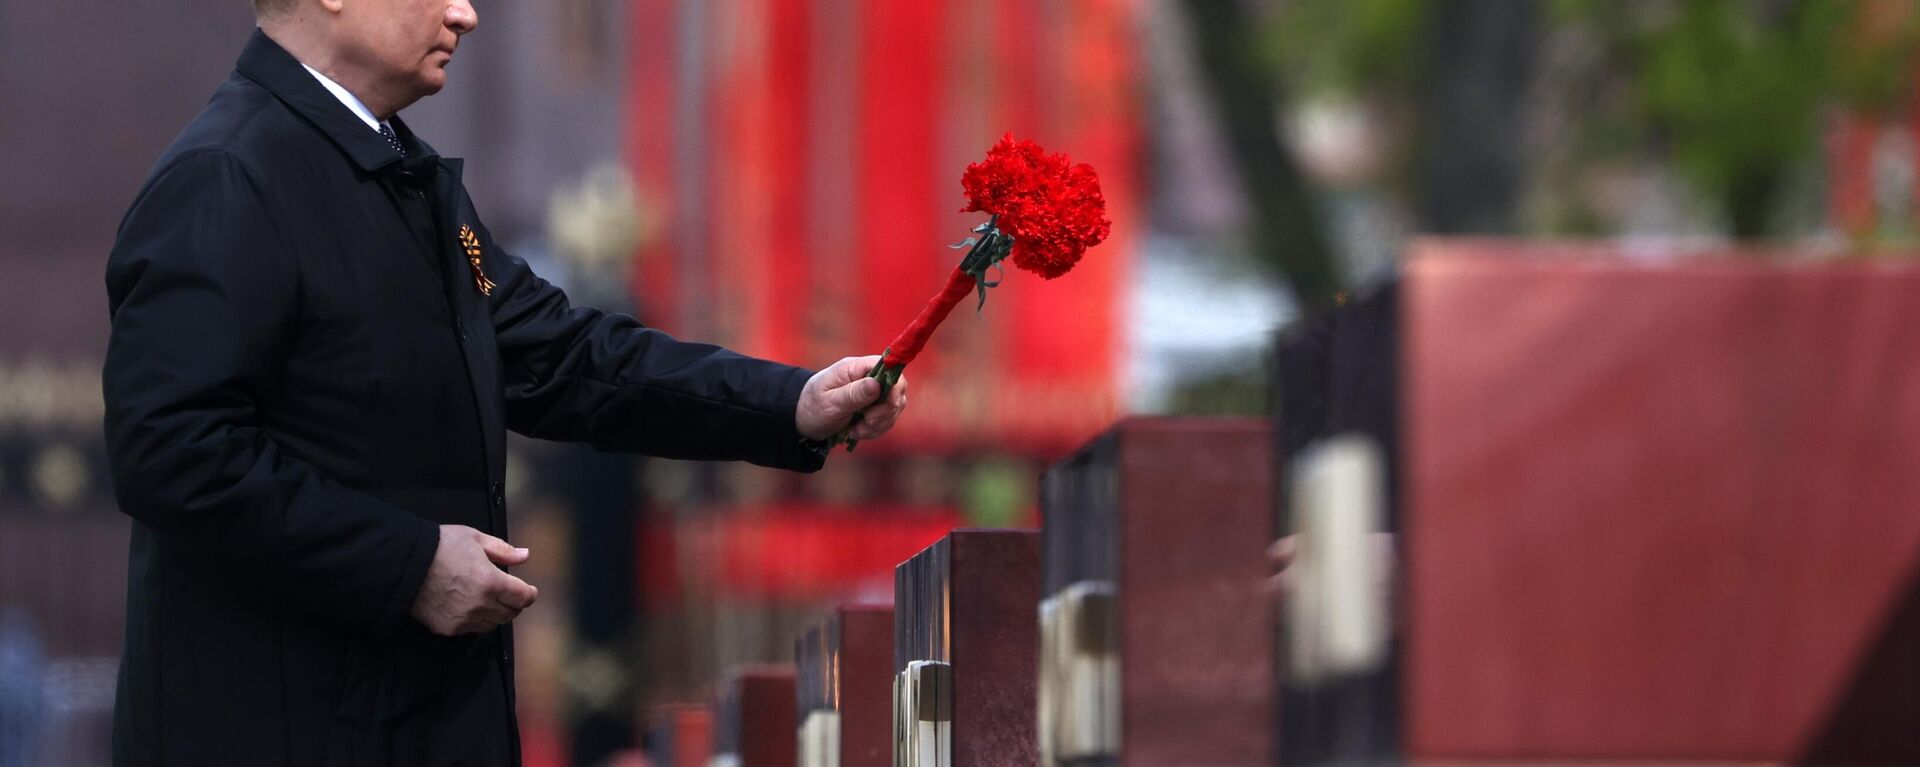 Russian President Vladimir Putin lays flowers at the Alley of Hero Cities before the Grave of the Unknown Soldier in Alexandrov Park, near the Kremlin. Monday 9 May 2022. - Sputnik International, 1920, 09.05.2022